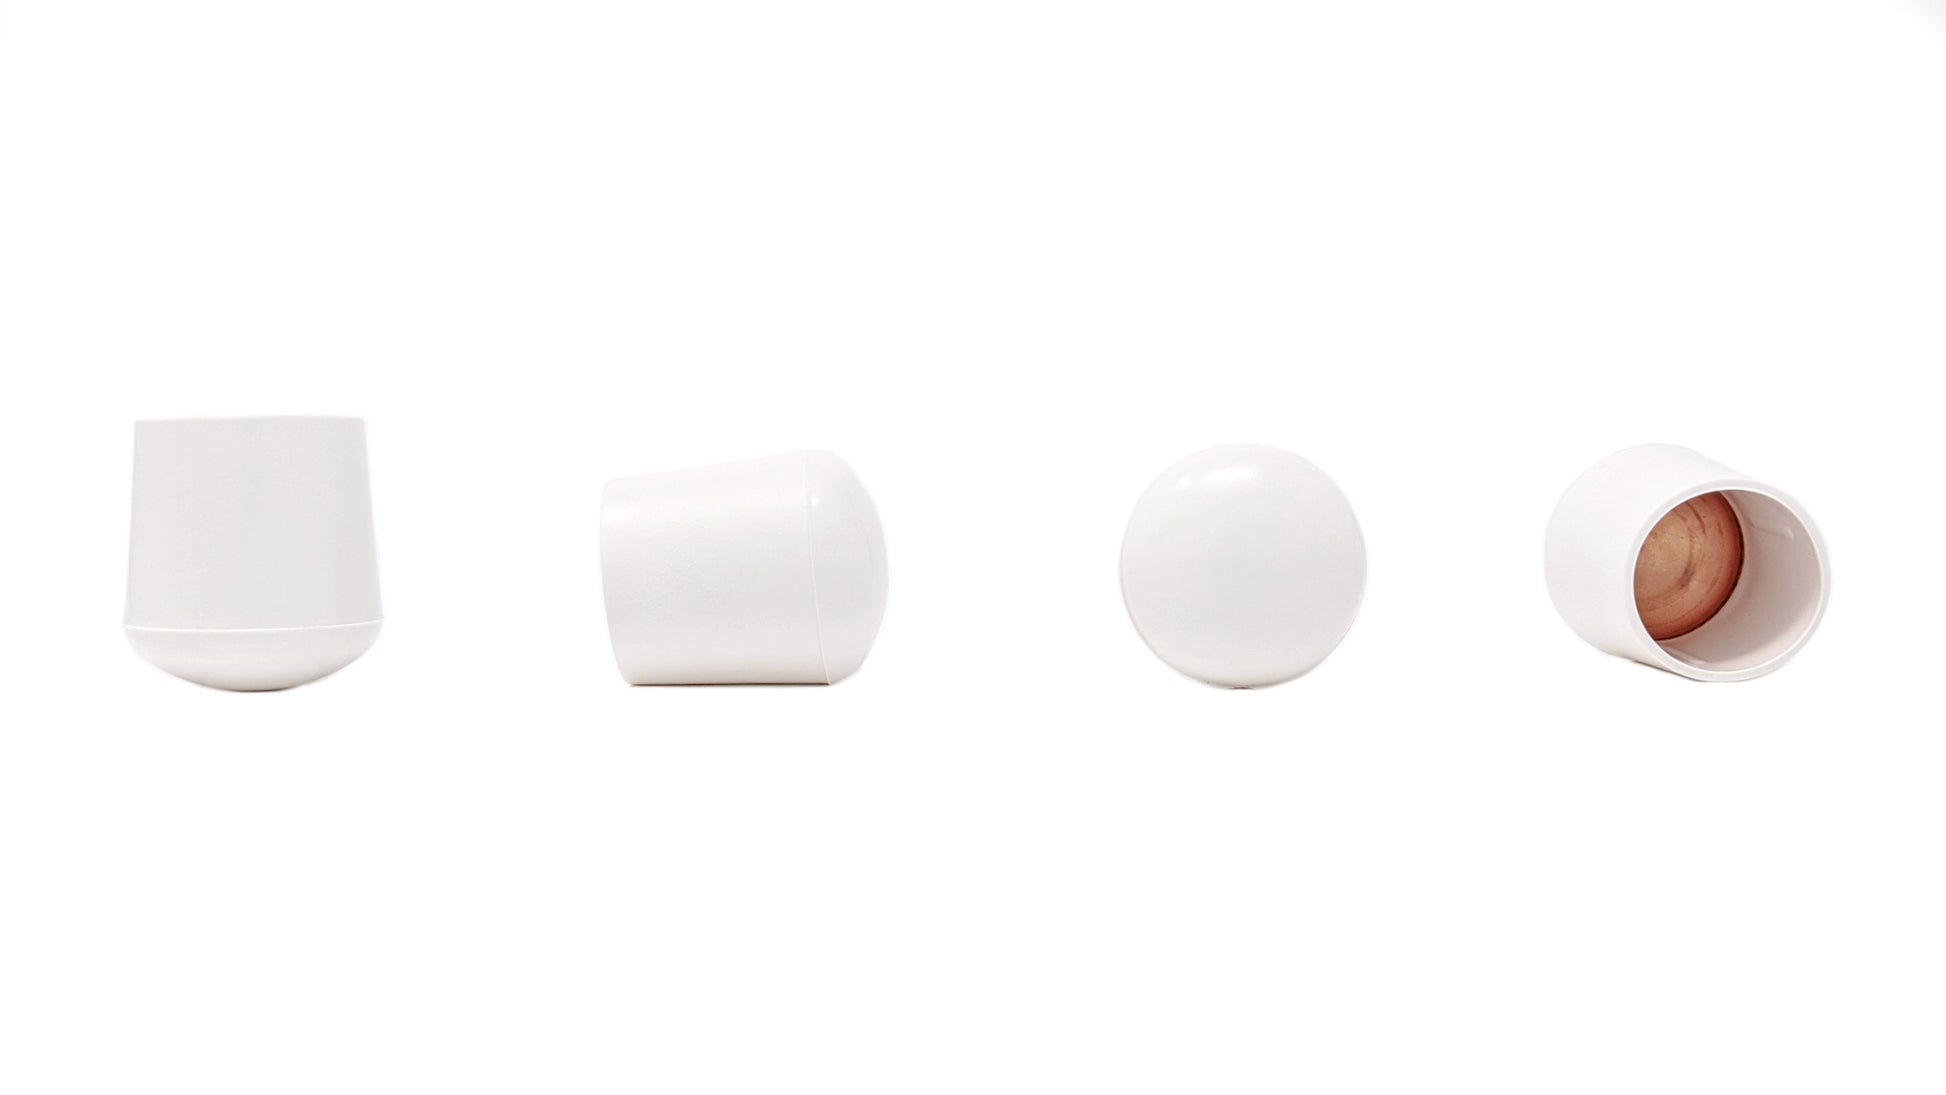 26mm White Rubber Ferrules with Steel Base Insert - Made in Germany - Keay Vital Parts